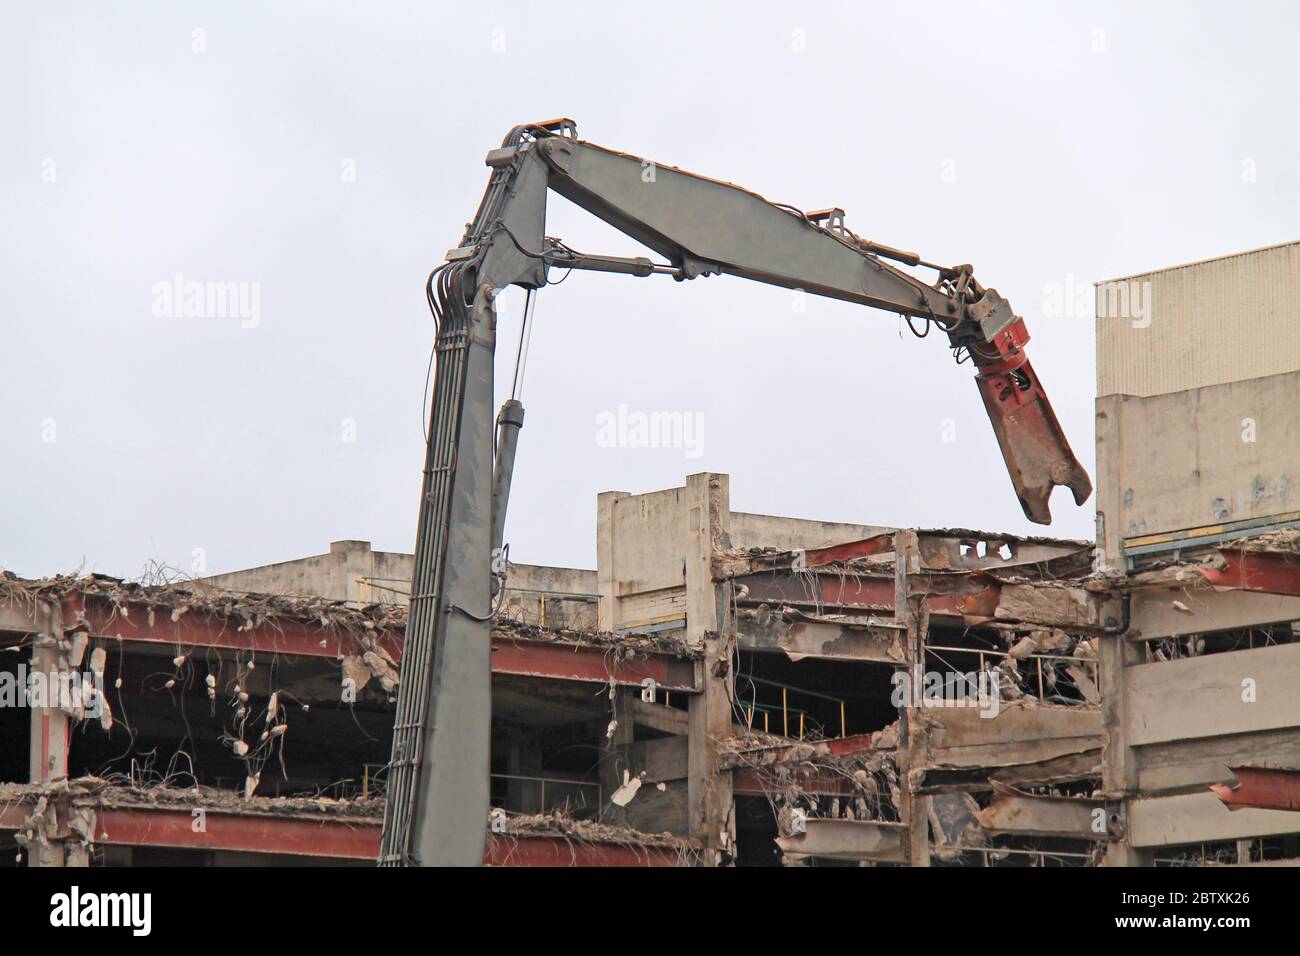 The Grab of a Pulveriser Demolishing a Building. Stock Photo